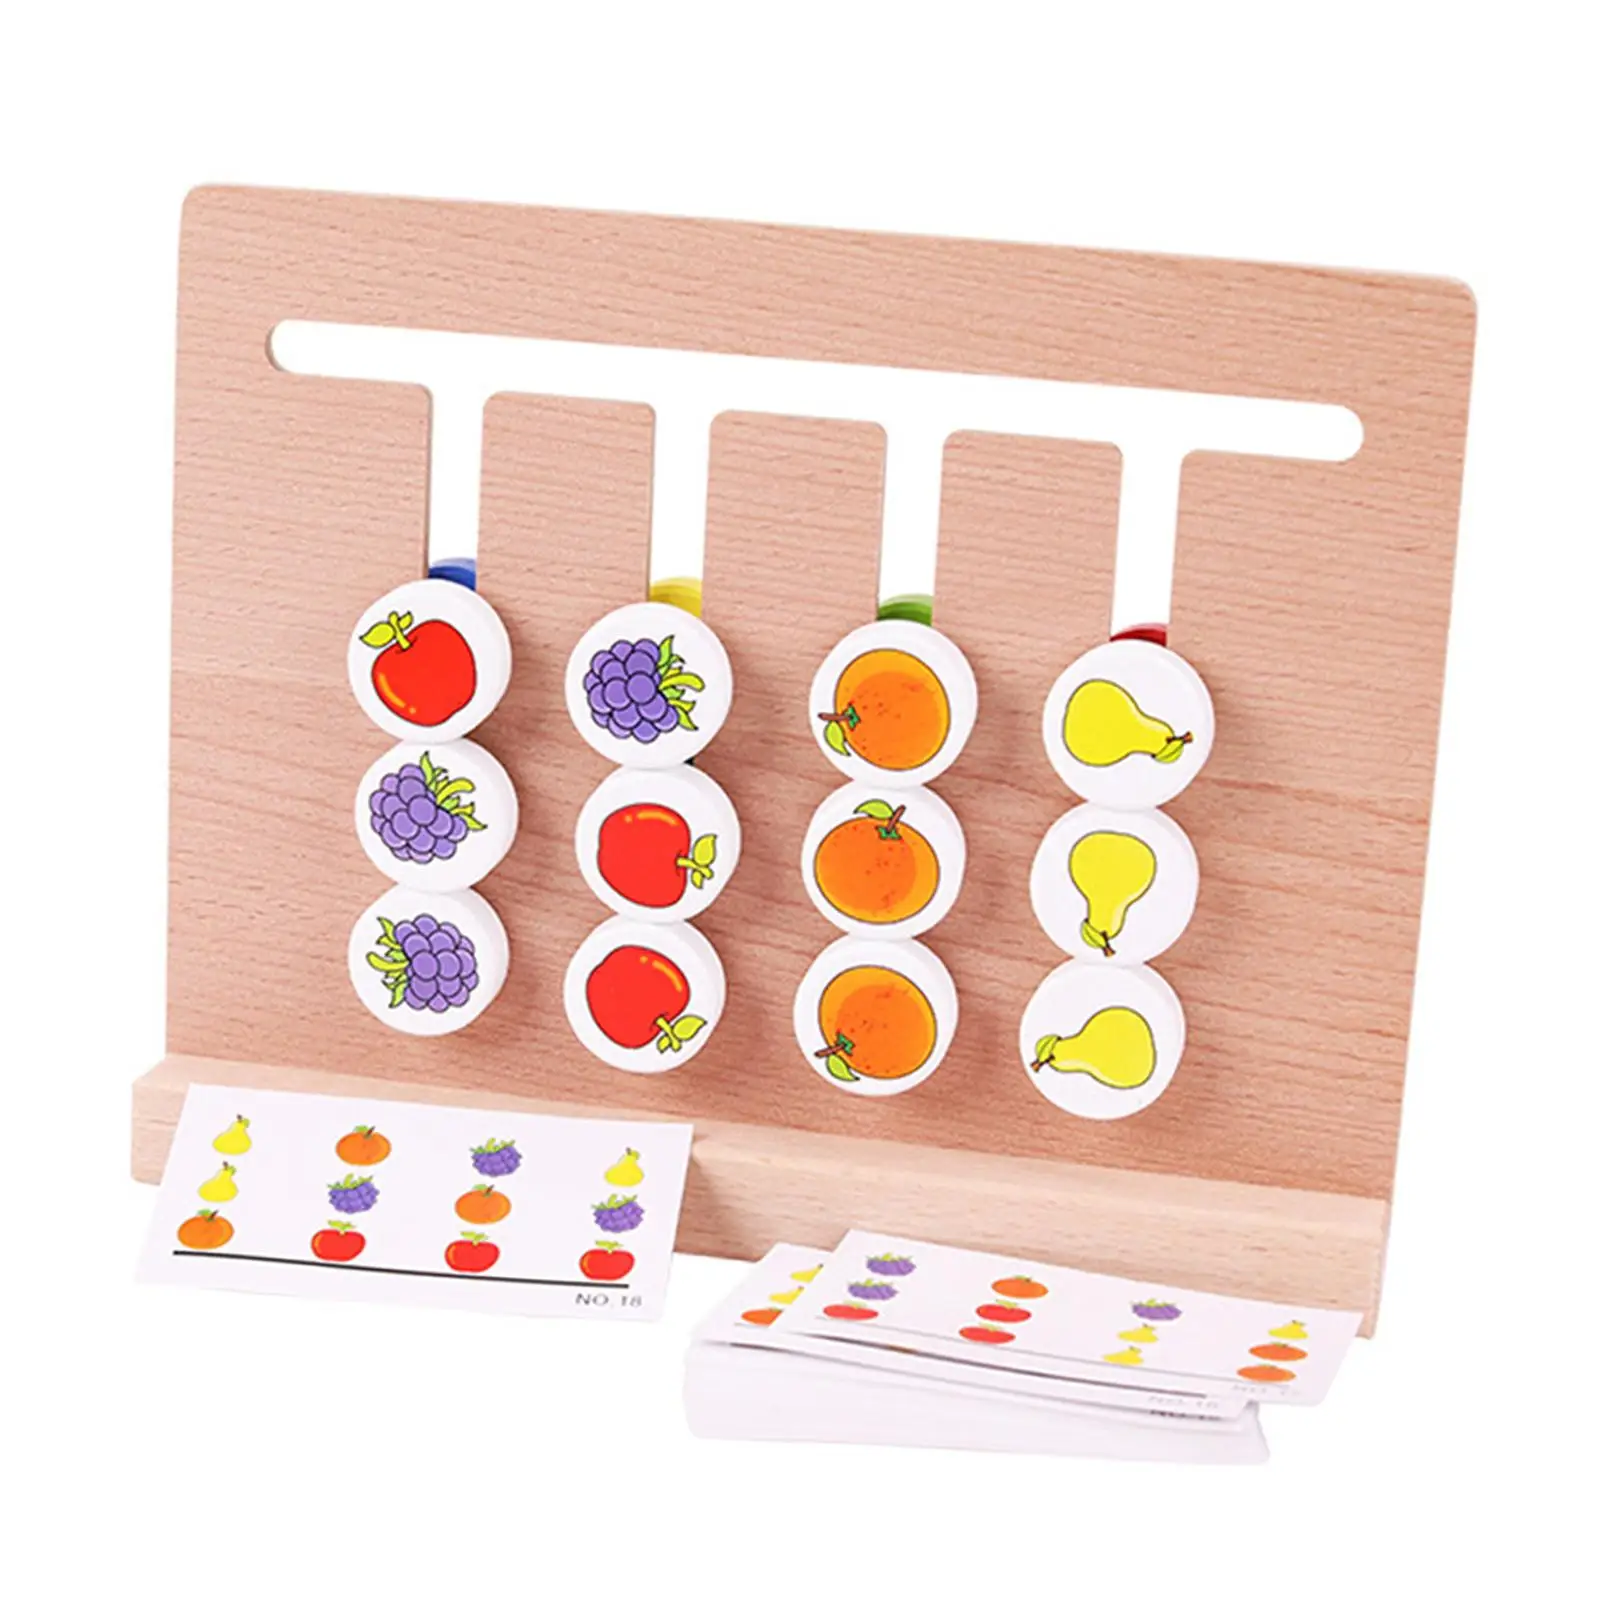 Matching Logical Game Birthday Gifts Developmental Toy Cognition Double Sided Color Sort Board for Kindergarten Nursery Toddlers